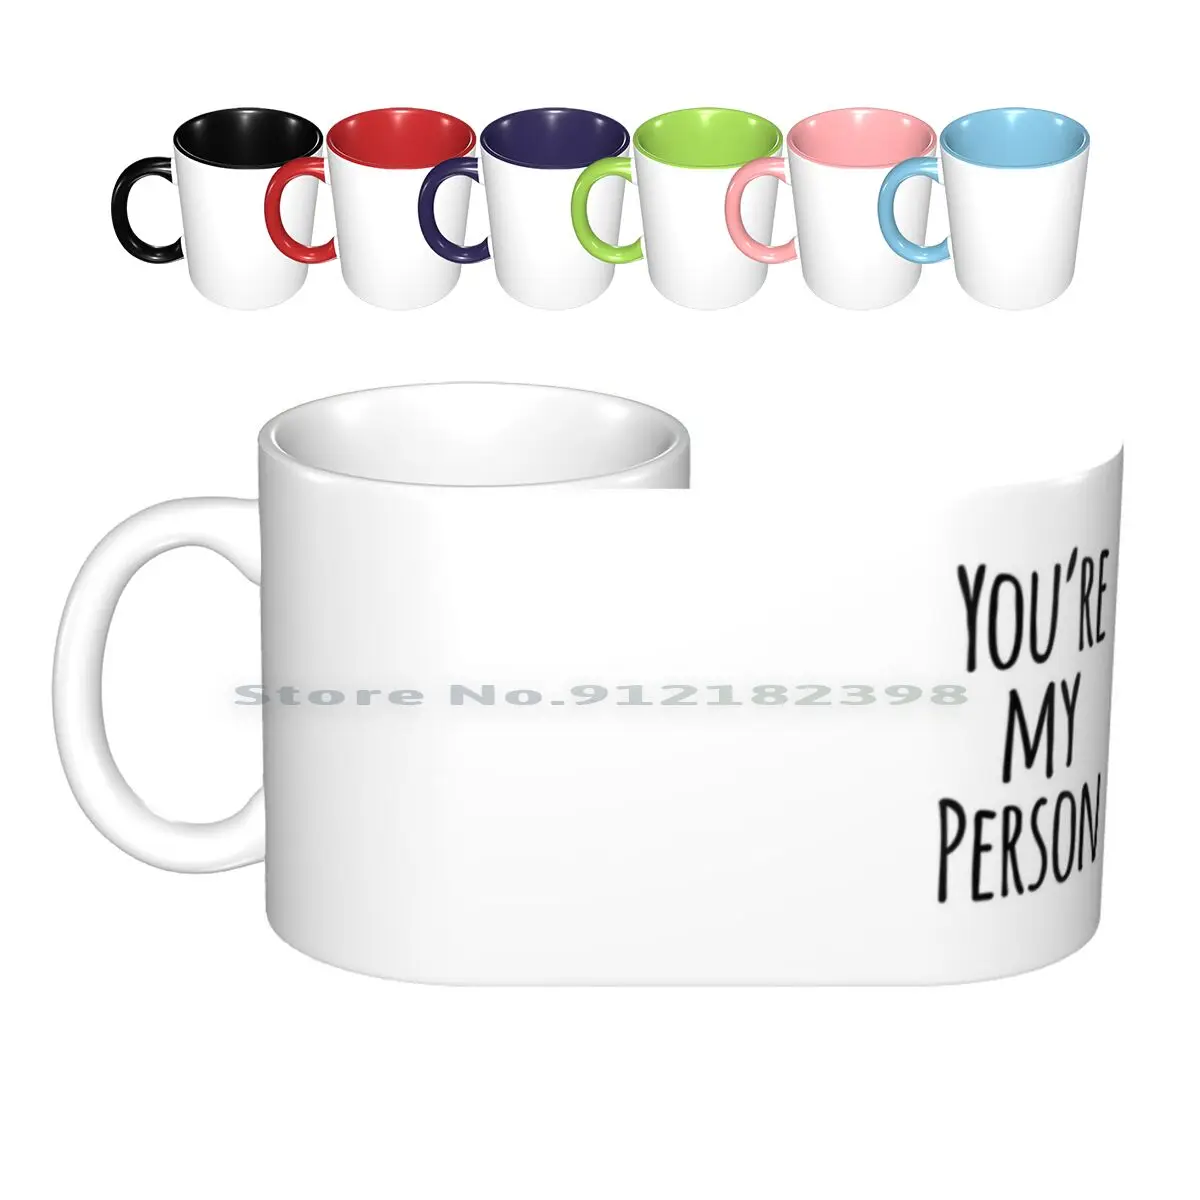 

You're My Person Friend Quote Ceramic Mugs Coffee Cups Milk Tea Mug Youre My Person Quote Greys Anatomy Typography Friendship